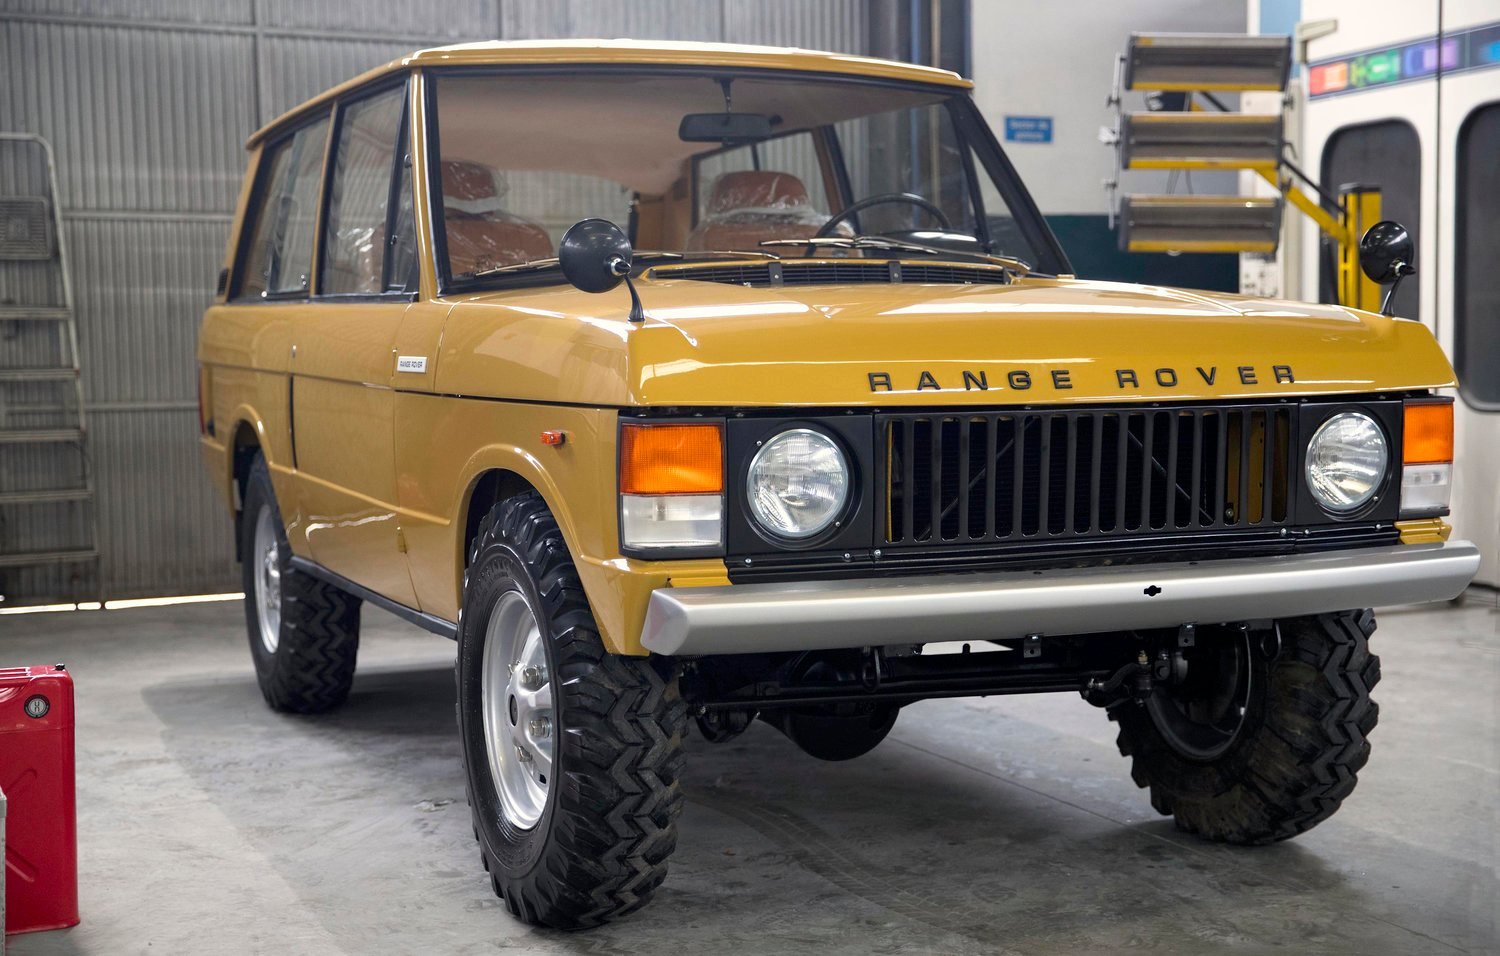 Our 1973 Range Rover packed with a V8 punch, finished with a Bahama Gold paint job.

#landrover #rangeroverclassic #rrc #classic #v8 #4x4 #overland